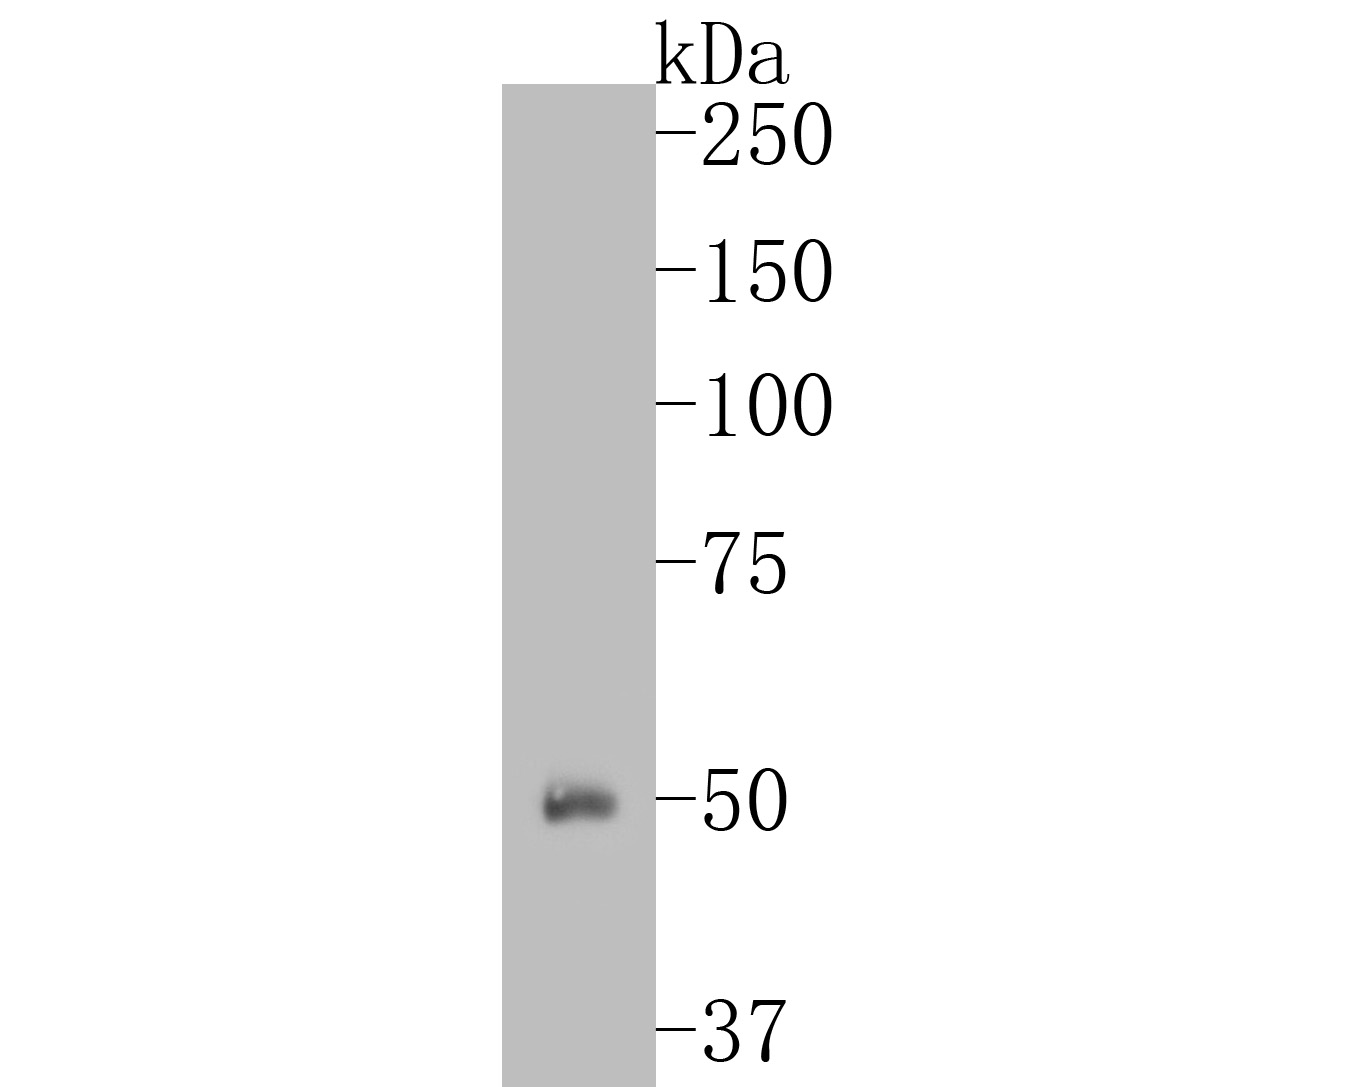 Western blot analysis of ETN1 on human plasma lysates. Proteins were transferred to a PVDF membrane and blocked with 5% BSA in PBS for 1 hour at room temperature. The primary antibody (ER1902-43, 1/1,000) was used in 5% BSA at room temperature for 2 hours. Goat Anti-Rabbit IgG - HRP Secondary Antibody (HA1001) at 1:5,000 dilution was used for 1 hour at room temperature.